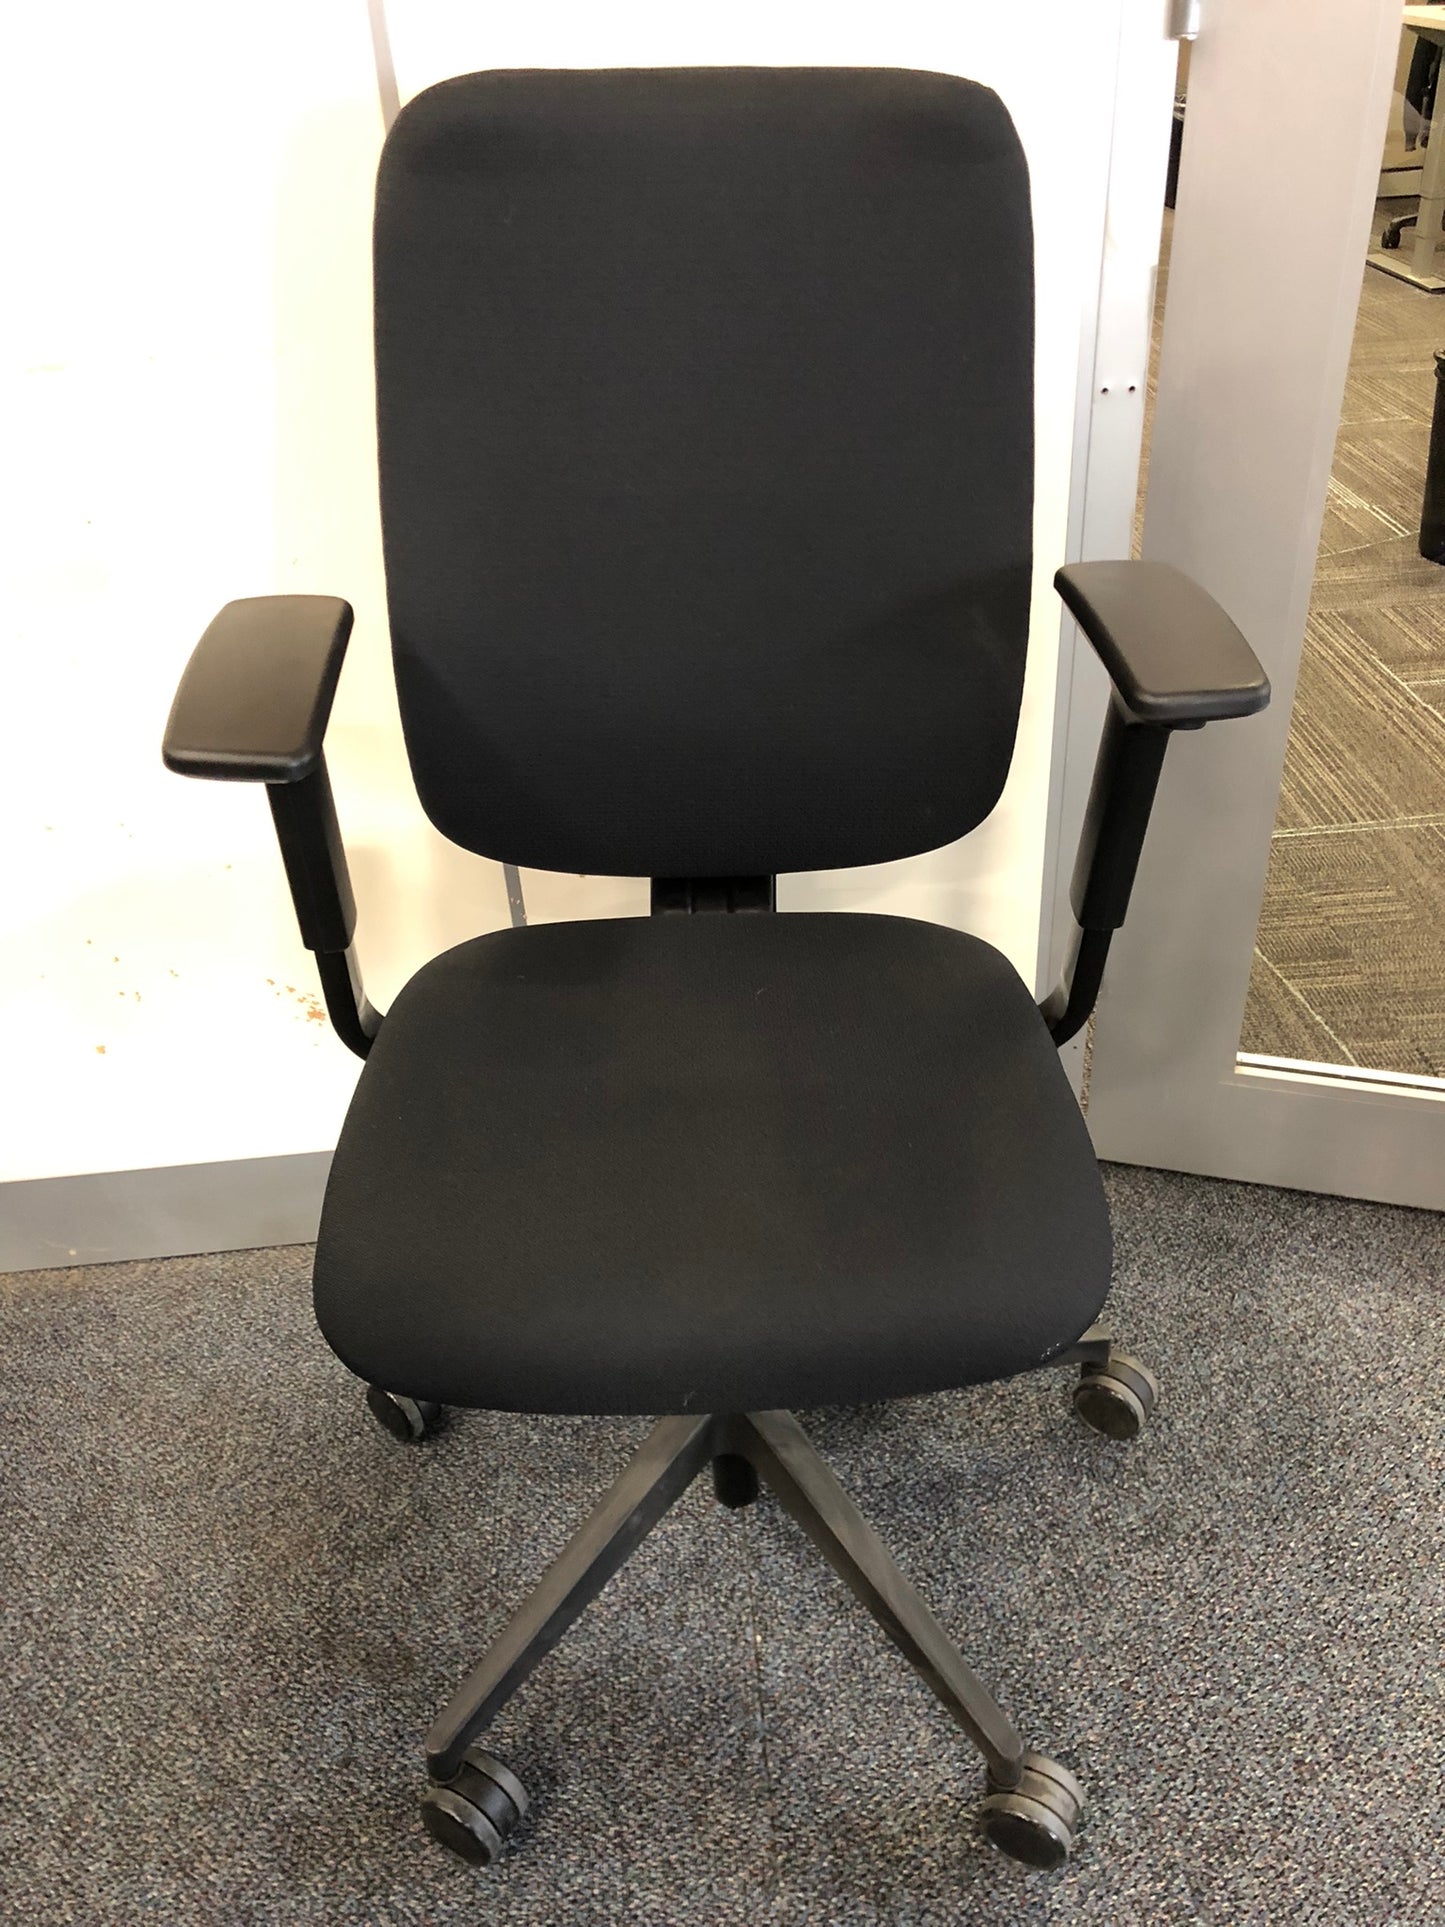 STEELCASE REPLY TASK CHAIR